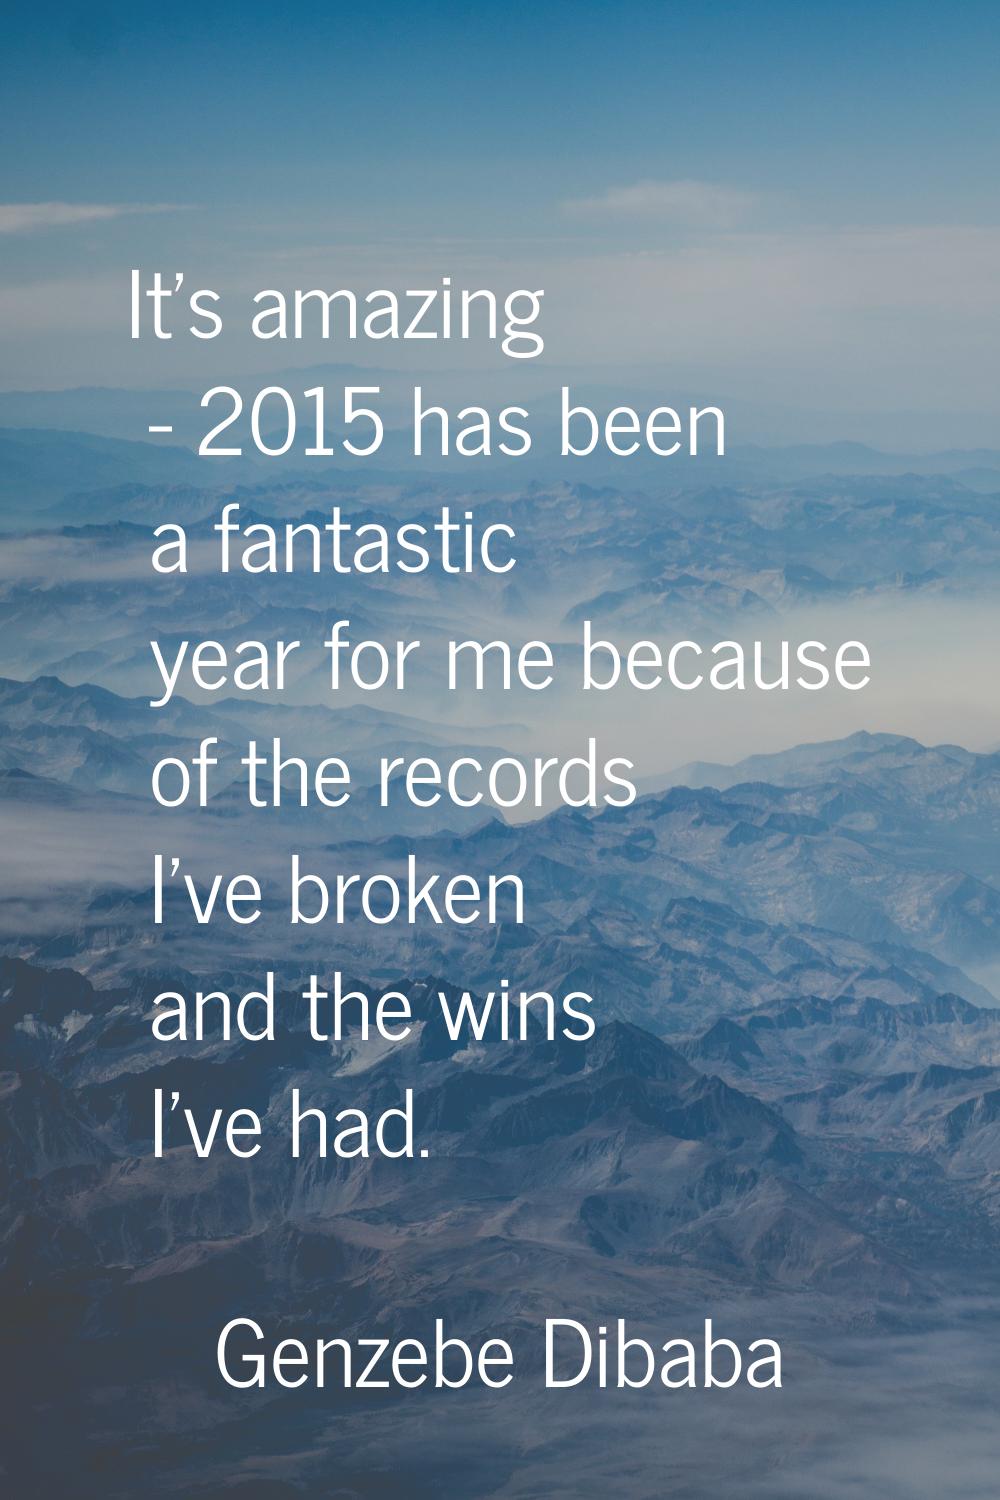 It's amazing - 2015 has been a fantastic year for me because of the records I've broken and the win